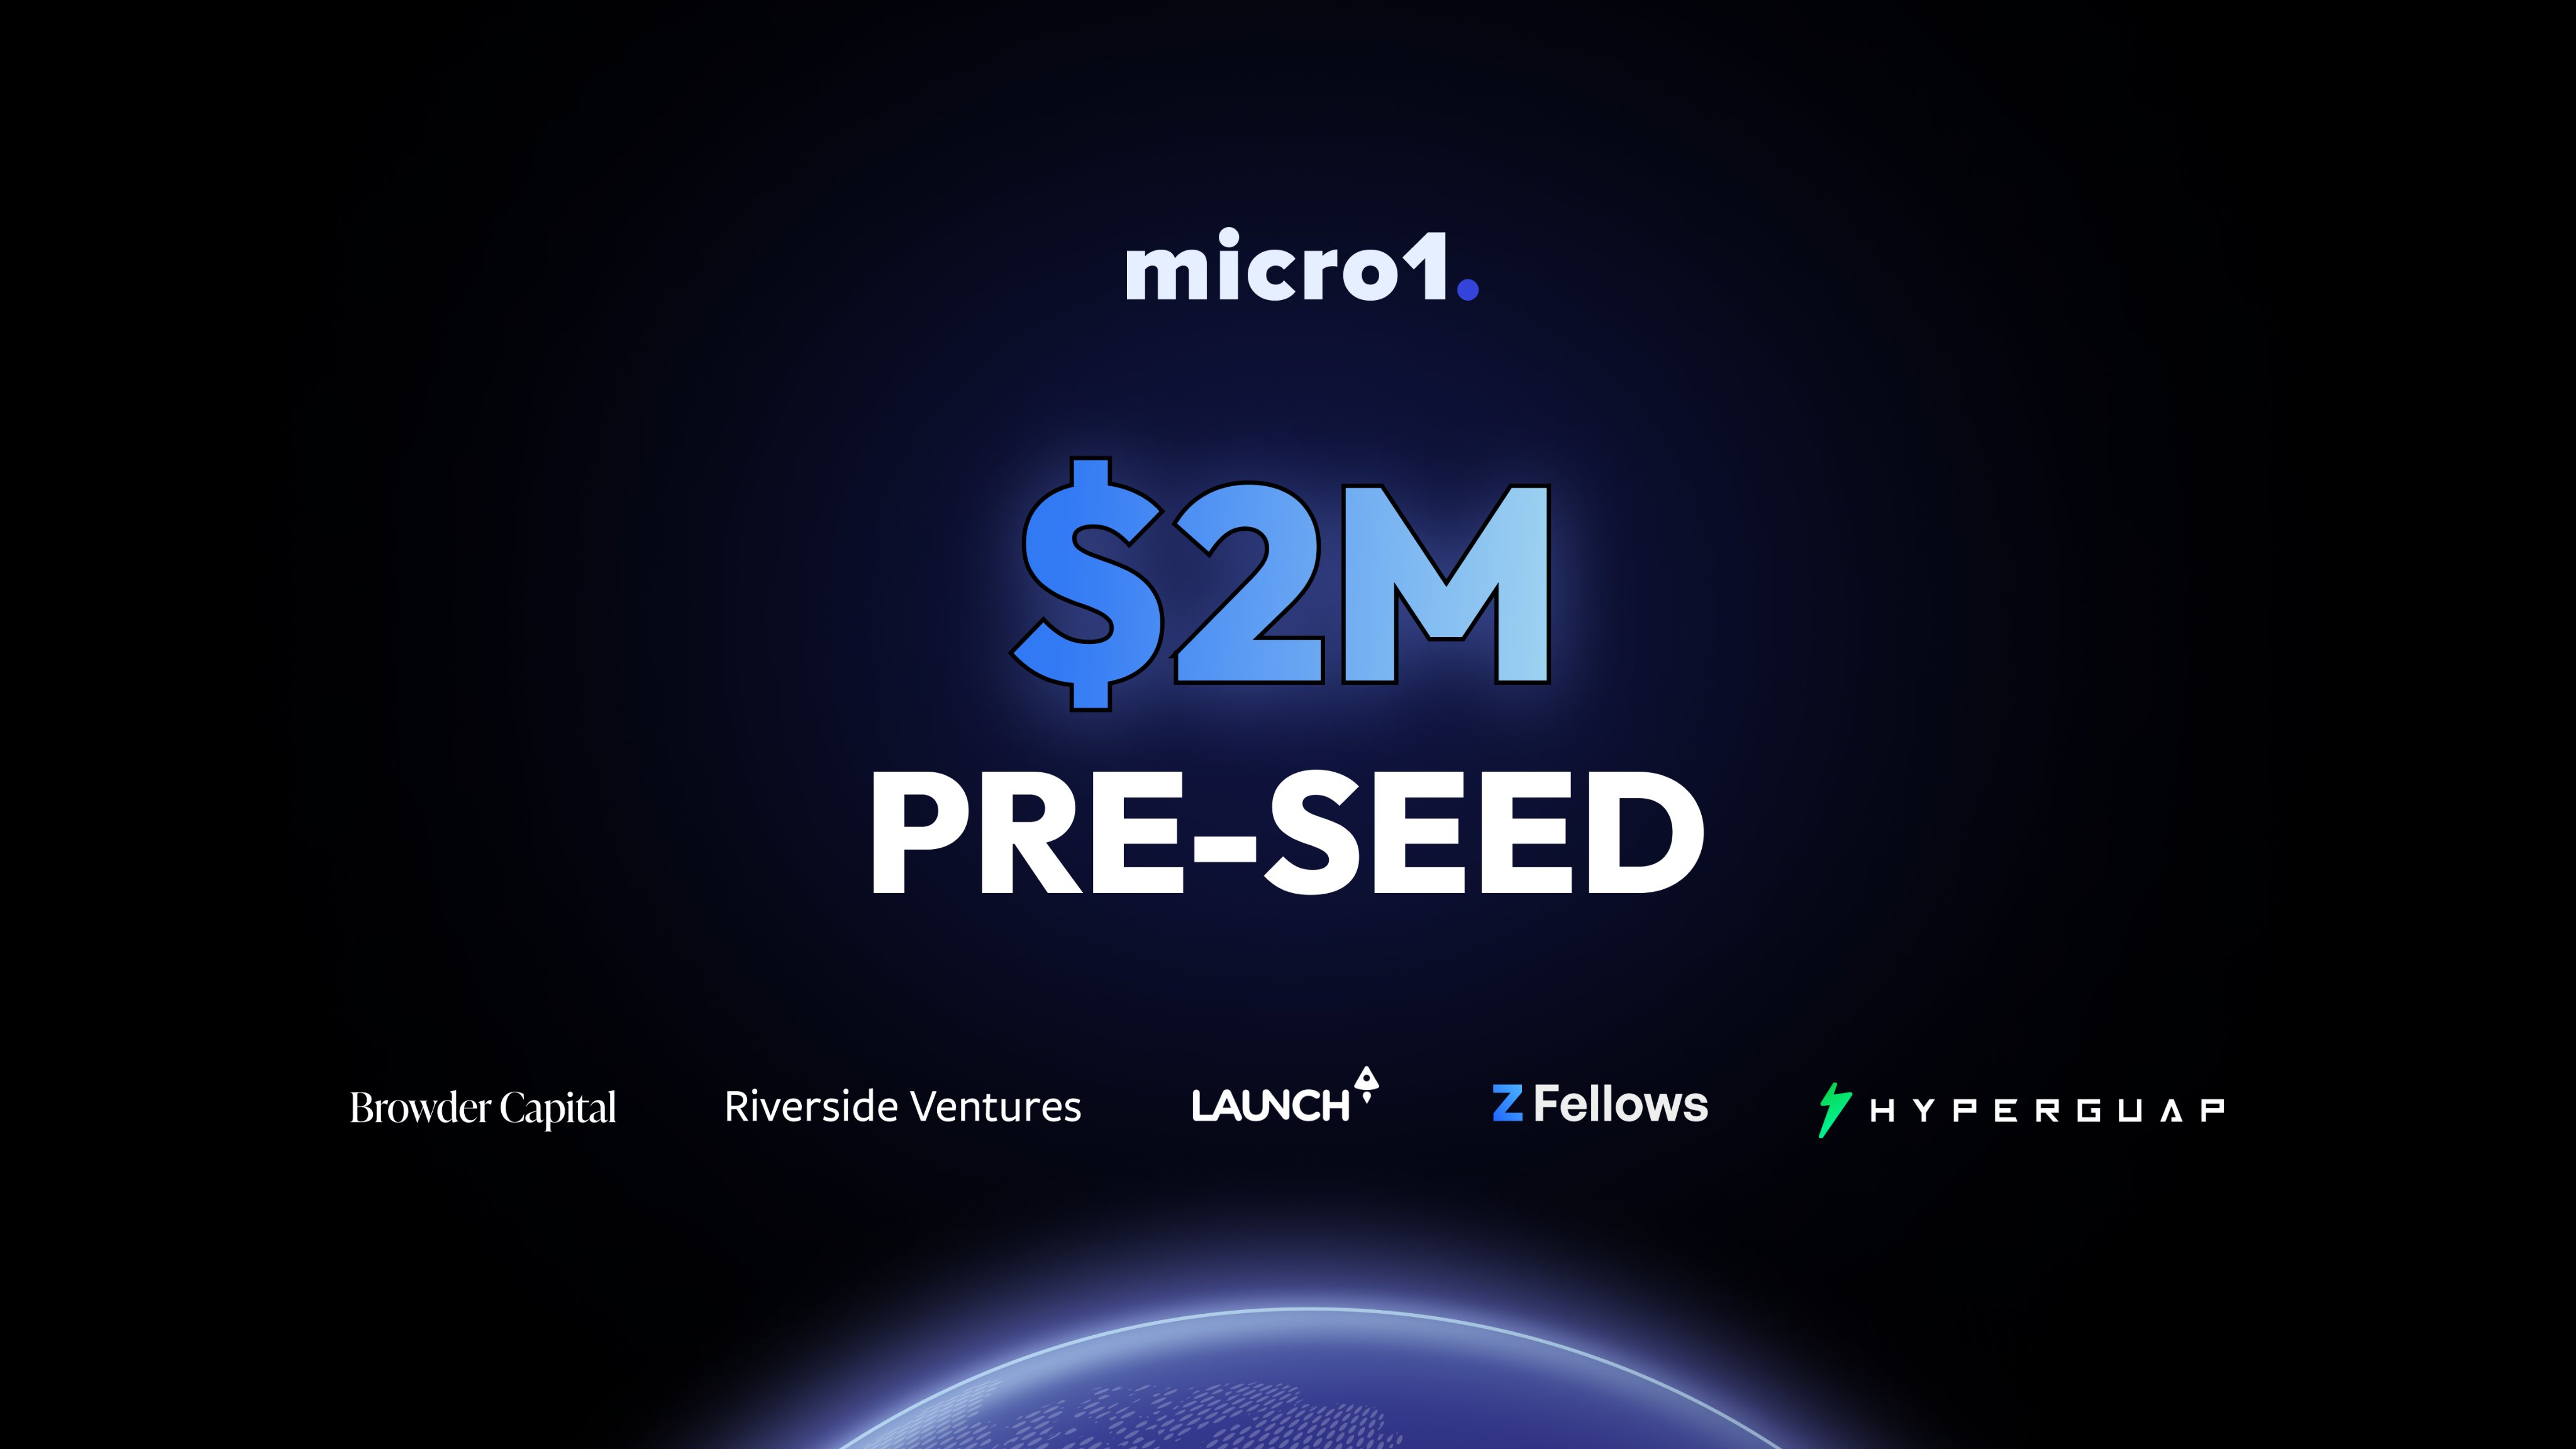 Ali Ansari on X: Excited to announce micro1's $2M pre-seed round